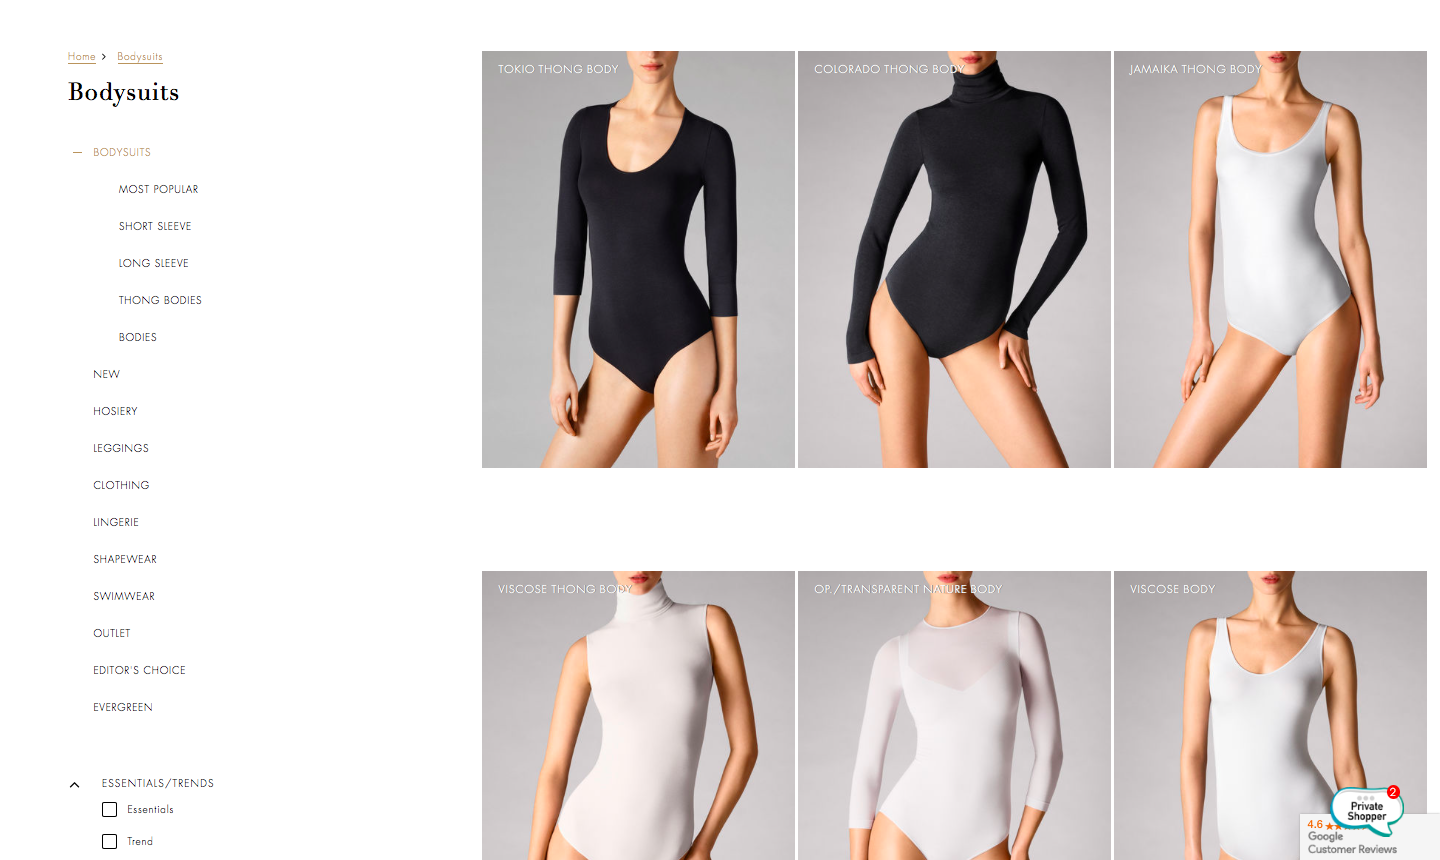 Wolford renames its string bodysuits online; adds sizing reference.